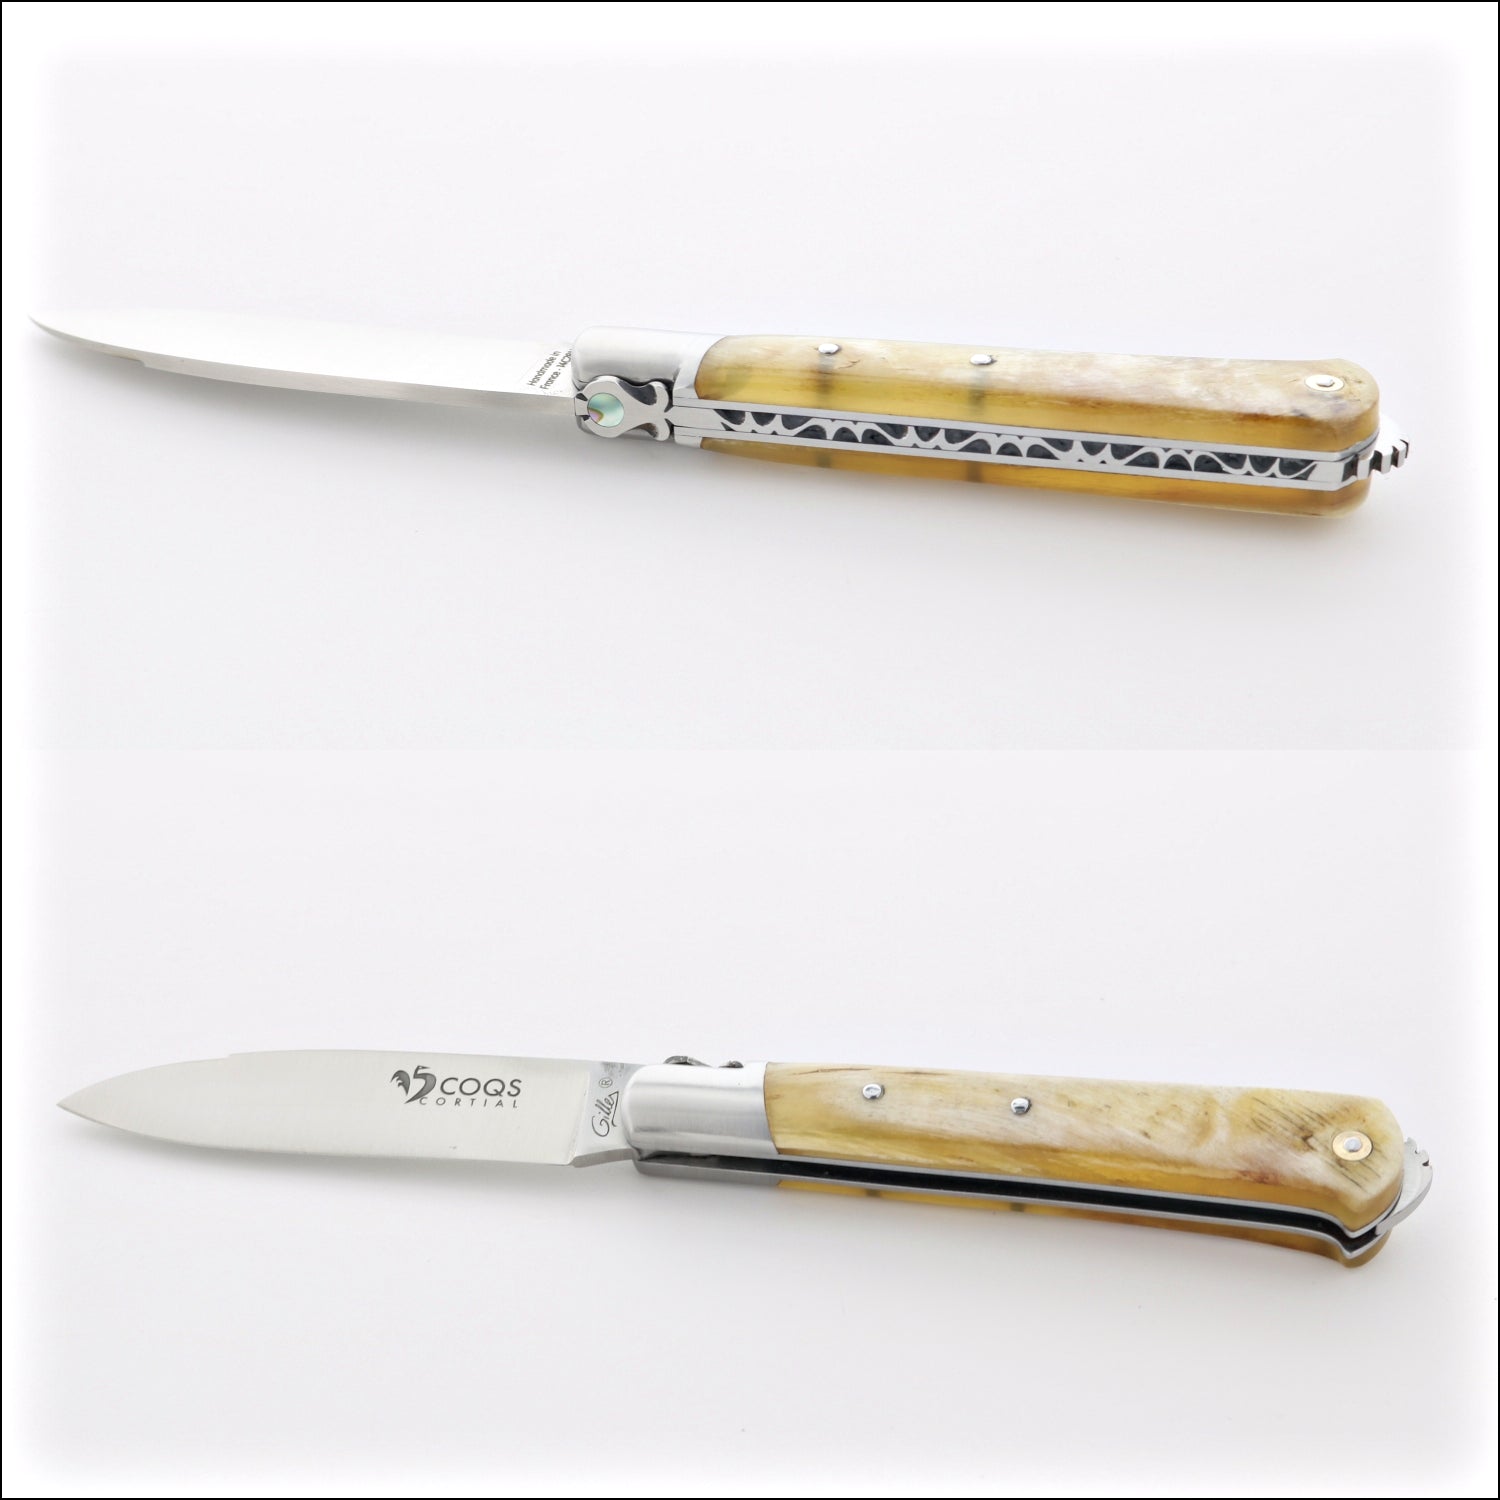 5 Coqs Pocket Knife - Ram Horn & Mother of Pearl Inlay